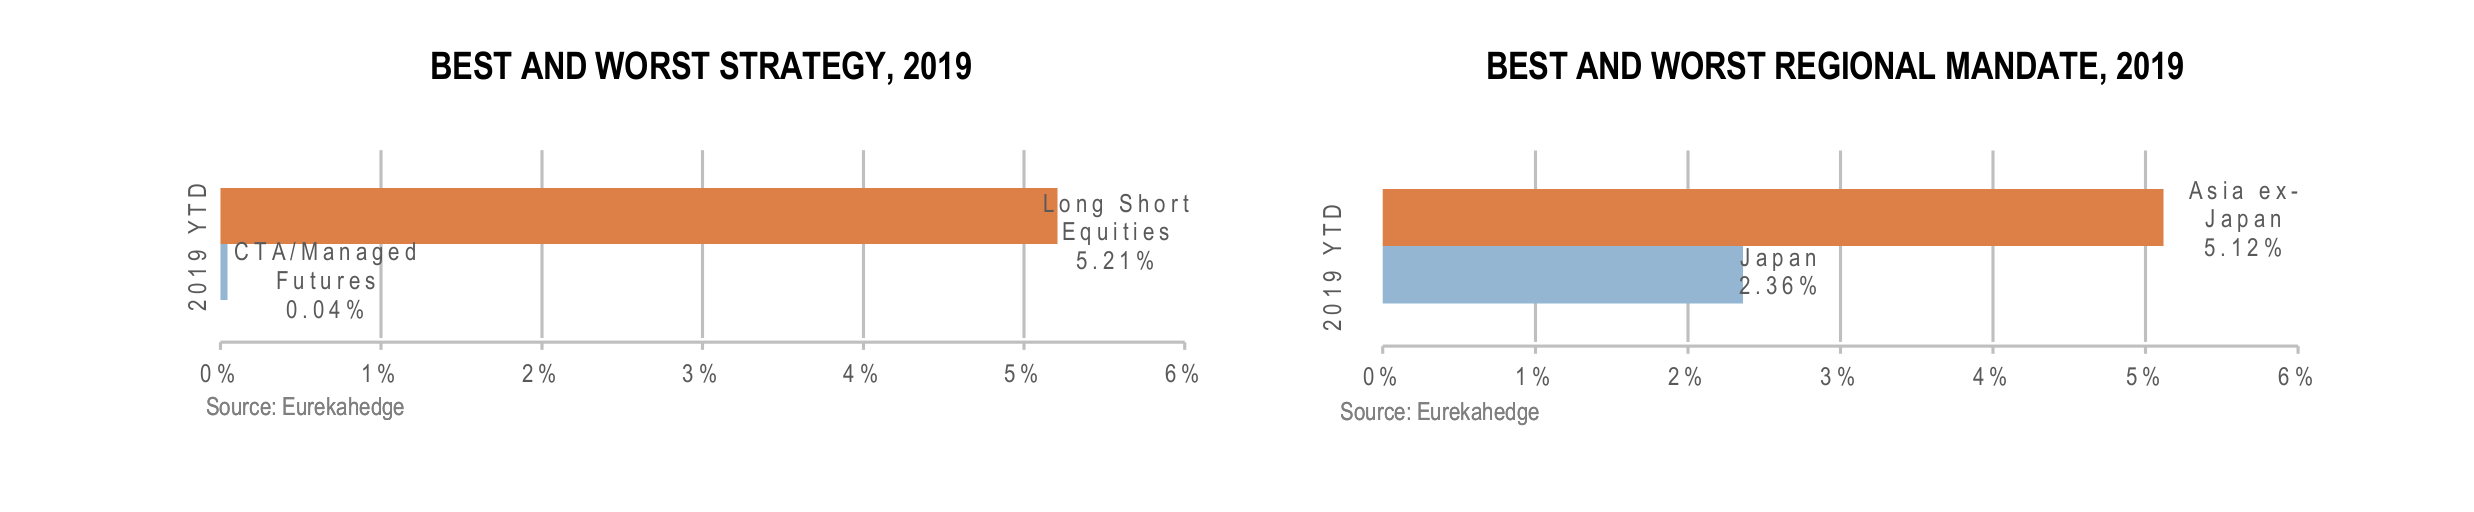 Global Hedge Funds Infographic April 2019 - best and worst strategy and regional mandate